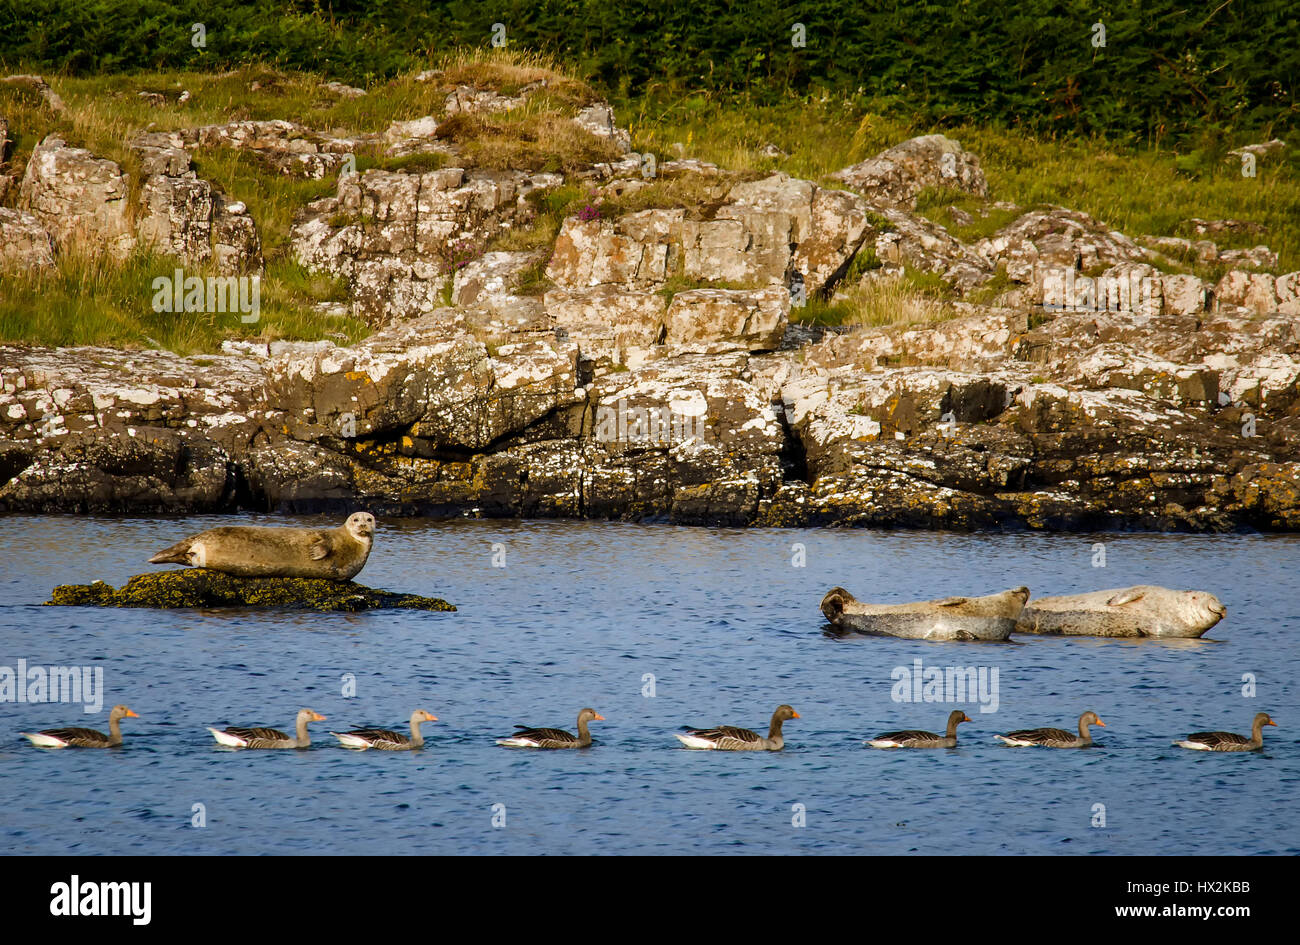 Three seals and eight geese in Indian file, Isle of Mull, Scotland Stock Photo